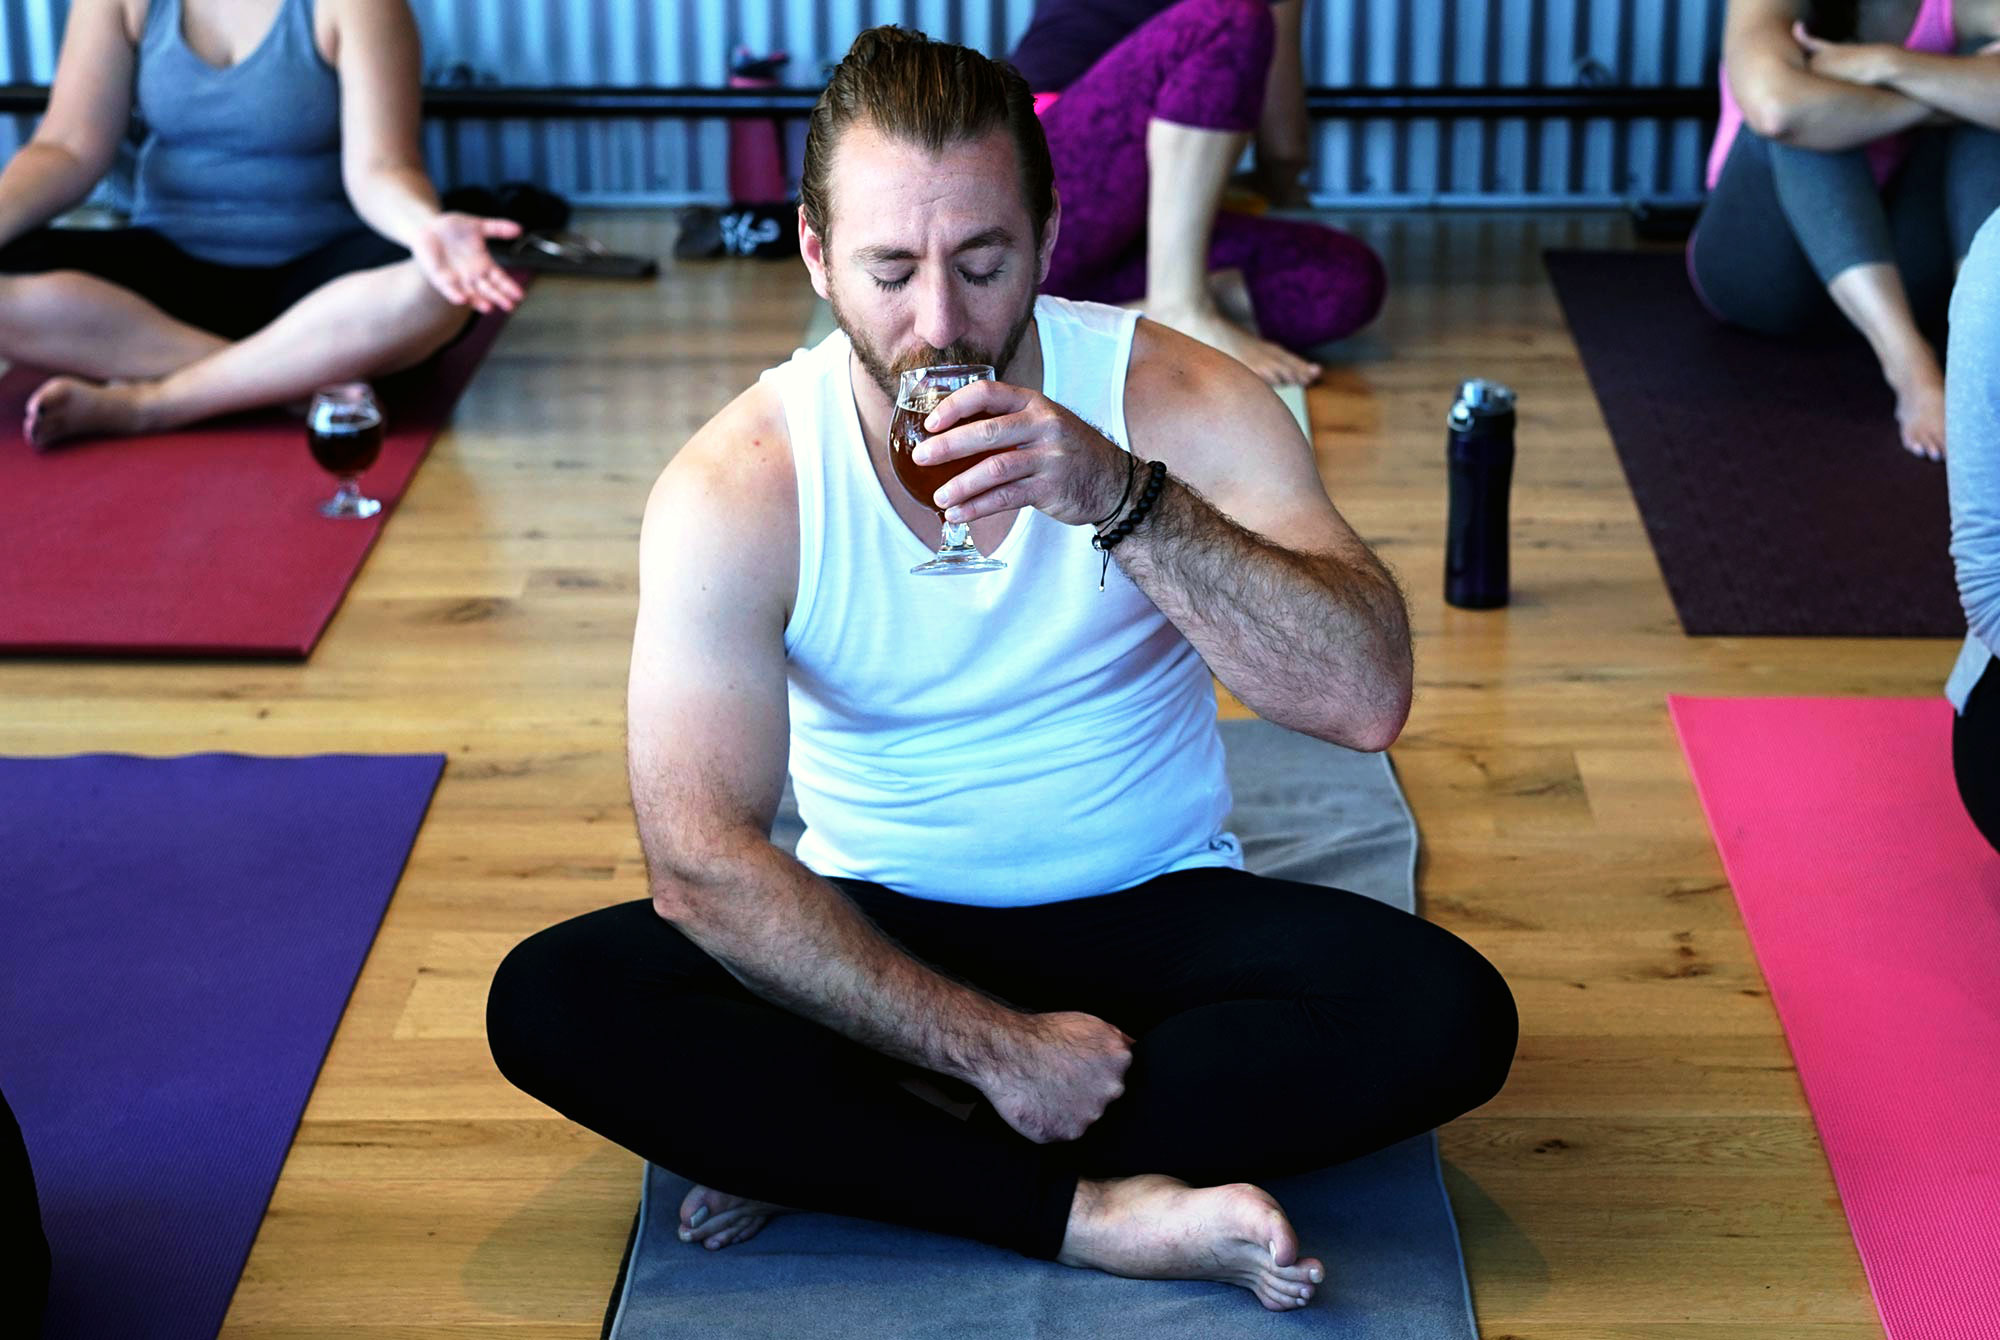 Letter from the Editor: Beer Yoga